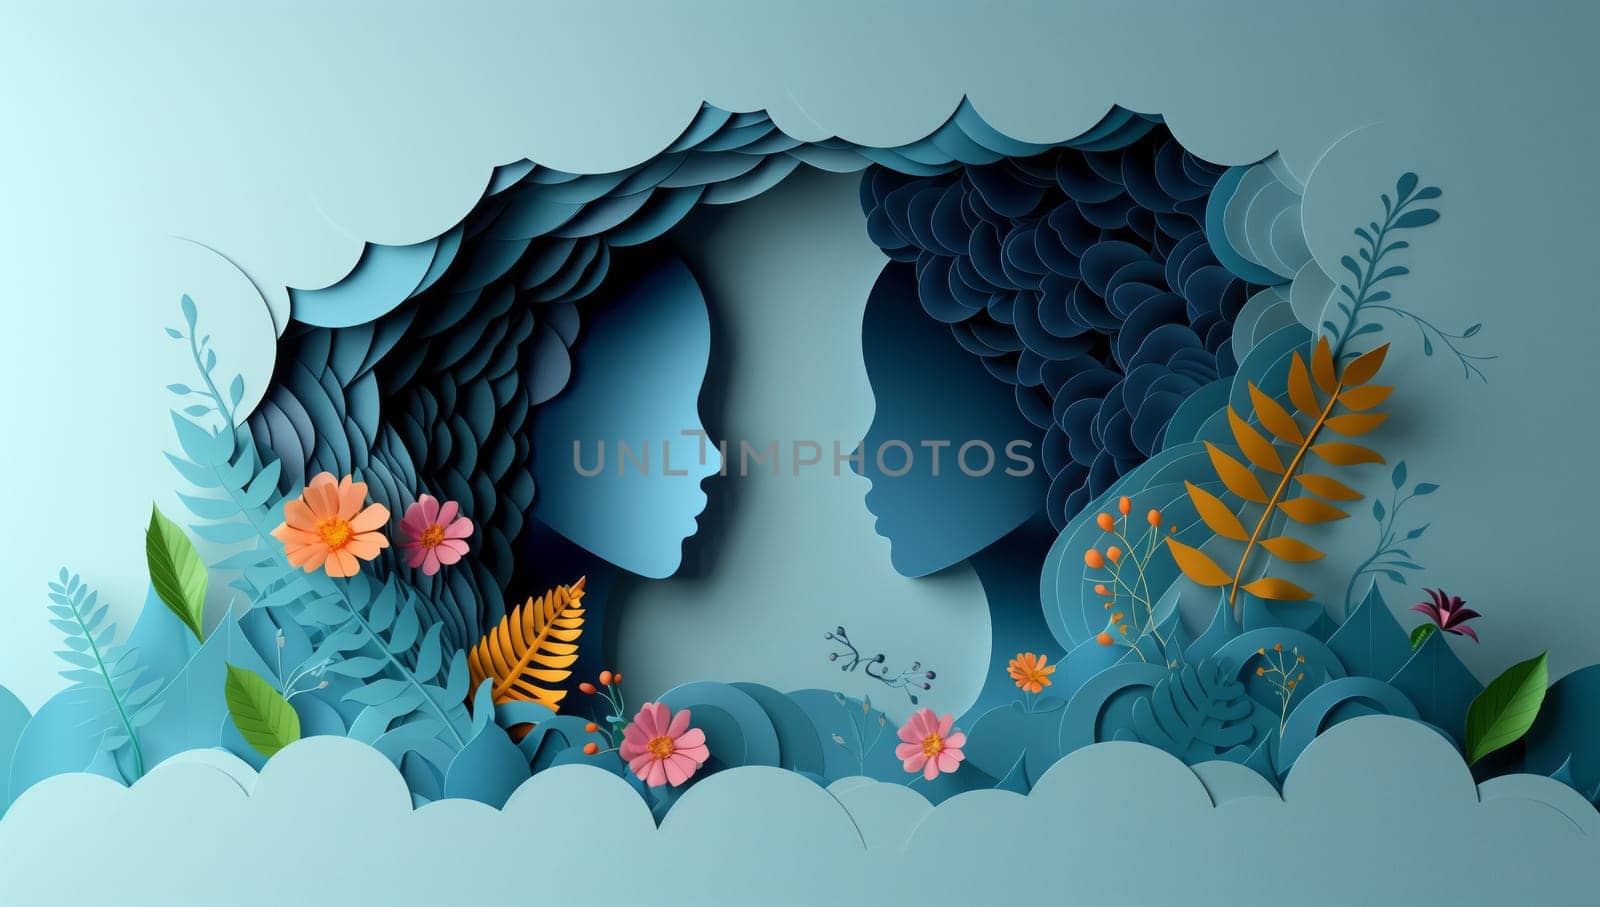 a paper cut out of two women s faces surrounded by flowers and leaves by richwolf